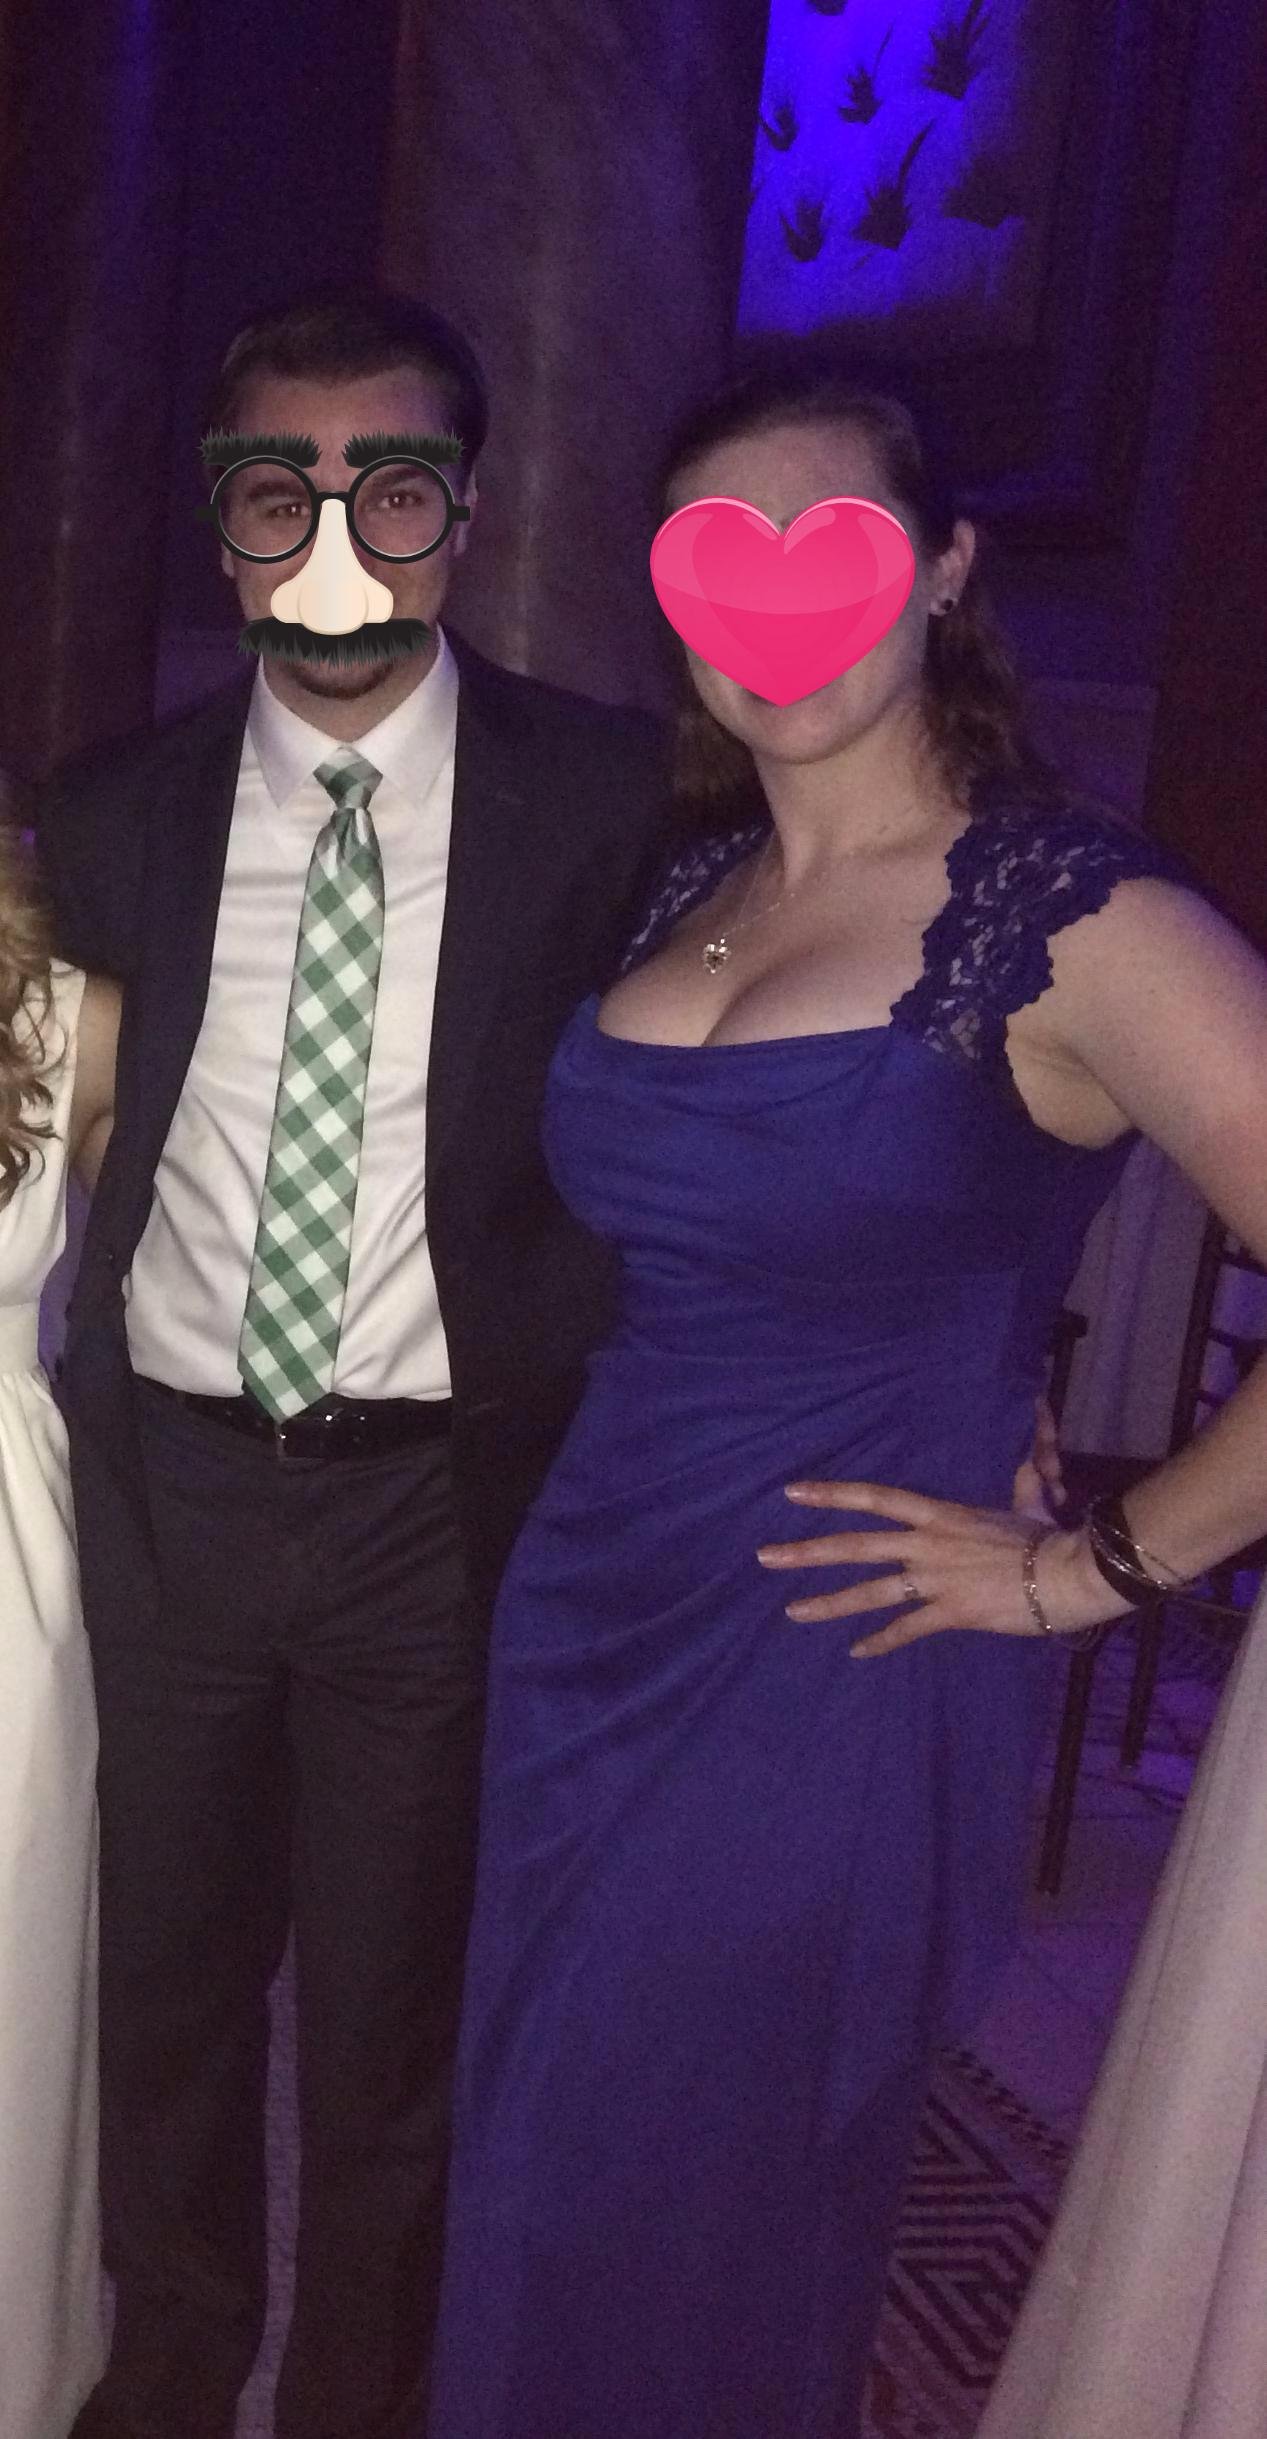 26/27 [MF4F] Dallas, TX -- Attractive, professional, discreet nerds looking for new friends!